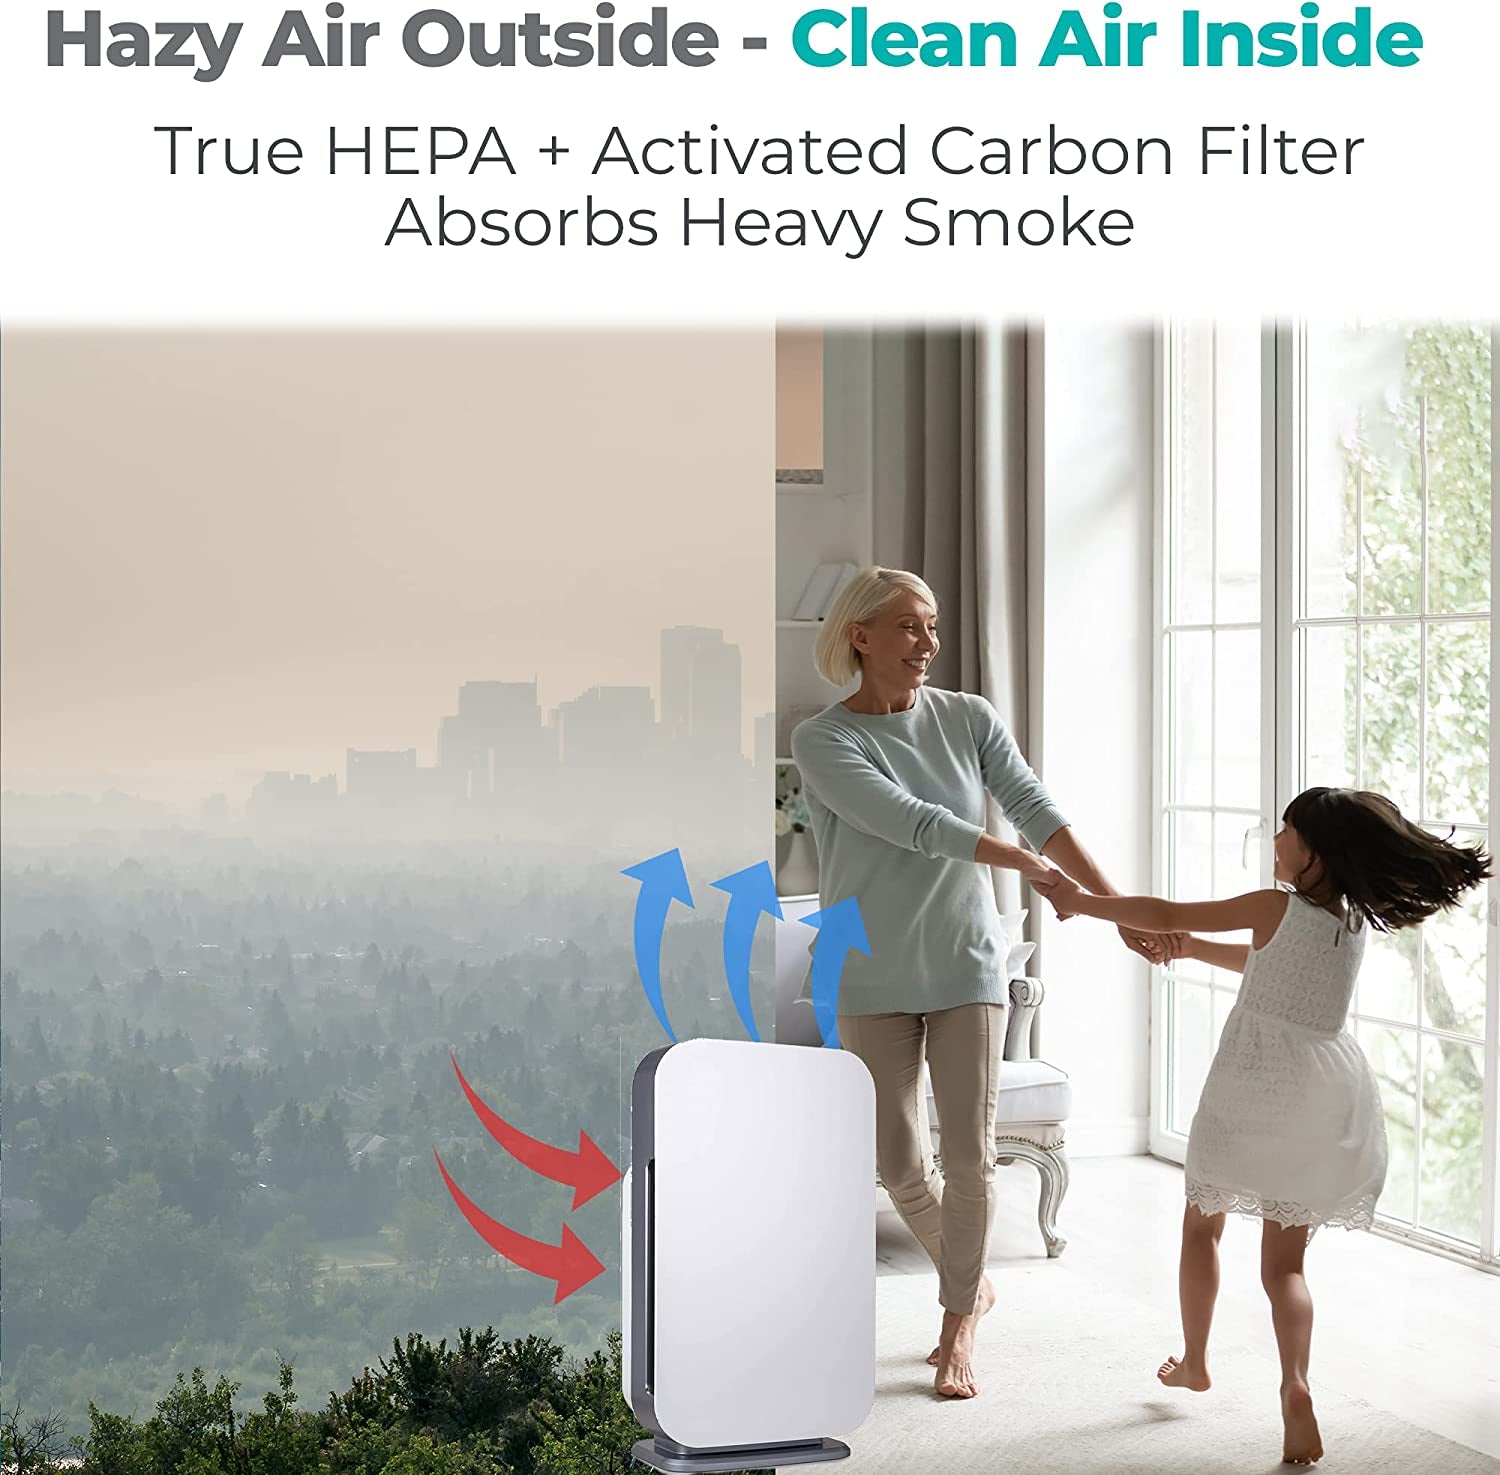 FLEX HEPA Air Purifier - Medical Grade Filtration H13 True HEPA - 700 Sqft Coverage - 99.9% Airborne Particle Removal,Captures Allergens, Dust, Mold, Germs, Smoke,Chemicals & Vocs - Smoke White